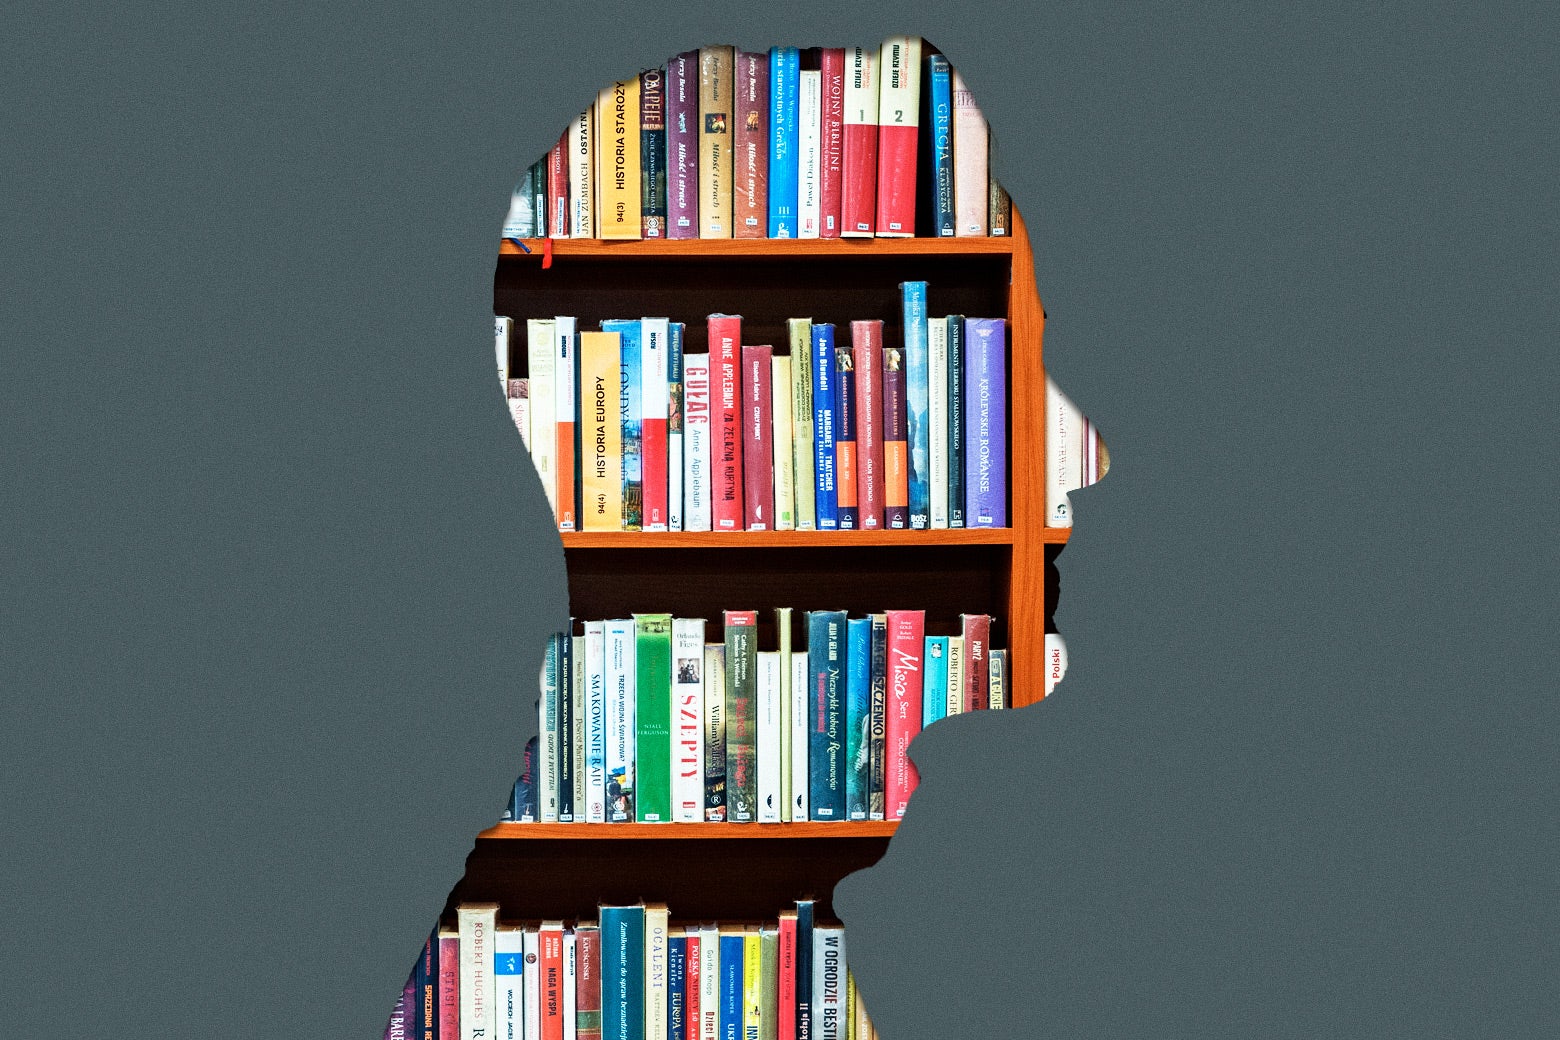 An outline of a person in profile, with the outline filled with books.